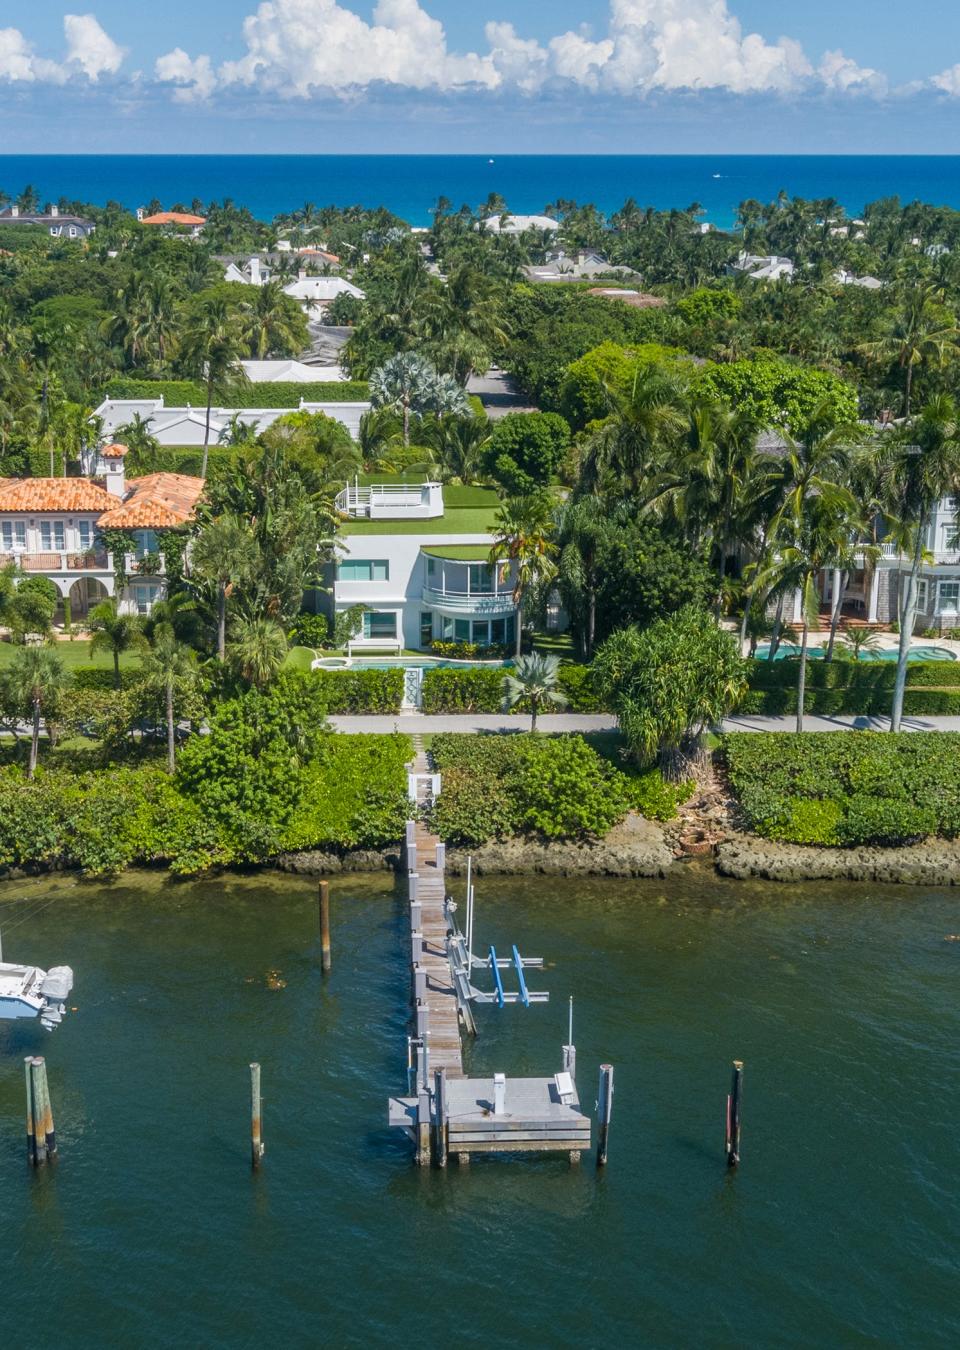 Just listed at $30 million, this landmarked house with 65 feet of water frontage and a dock in the Intracoastal Waterway will be sold with deeded ocean access via a neighborhood cabana down the block.